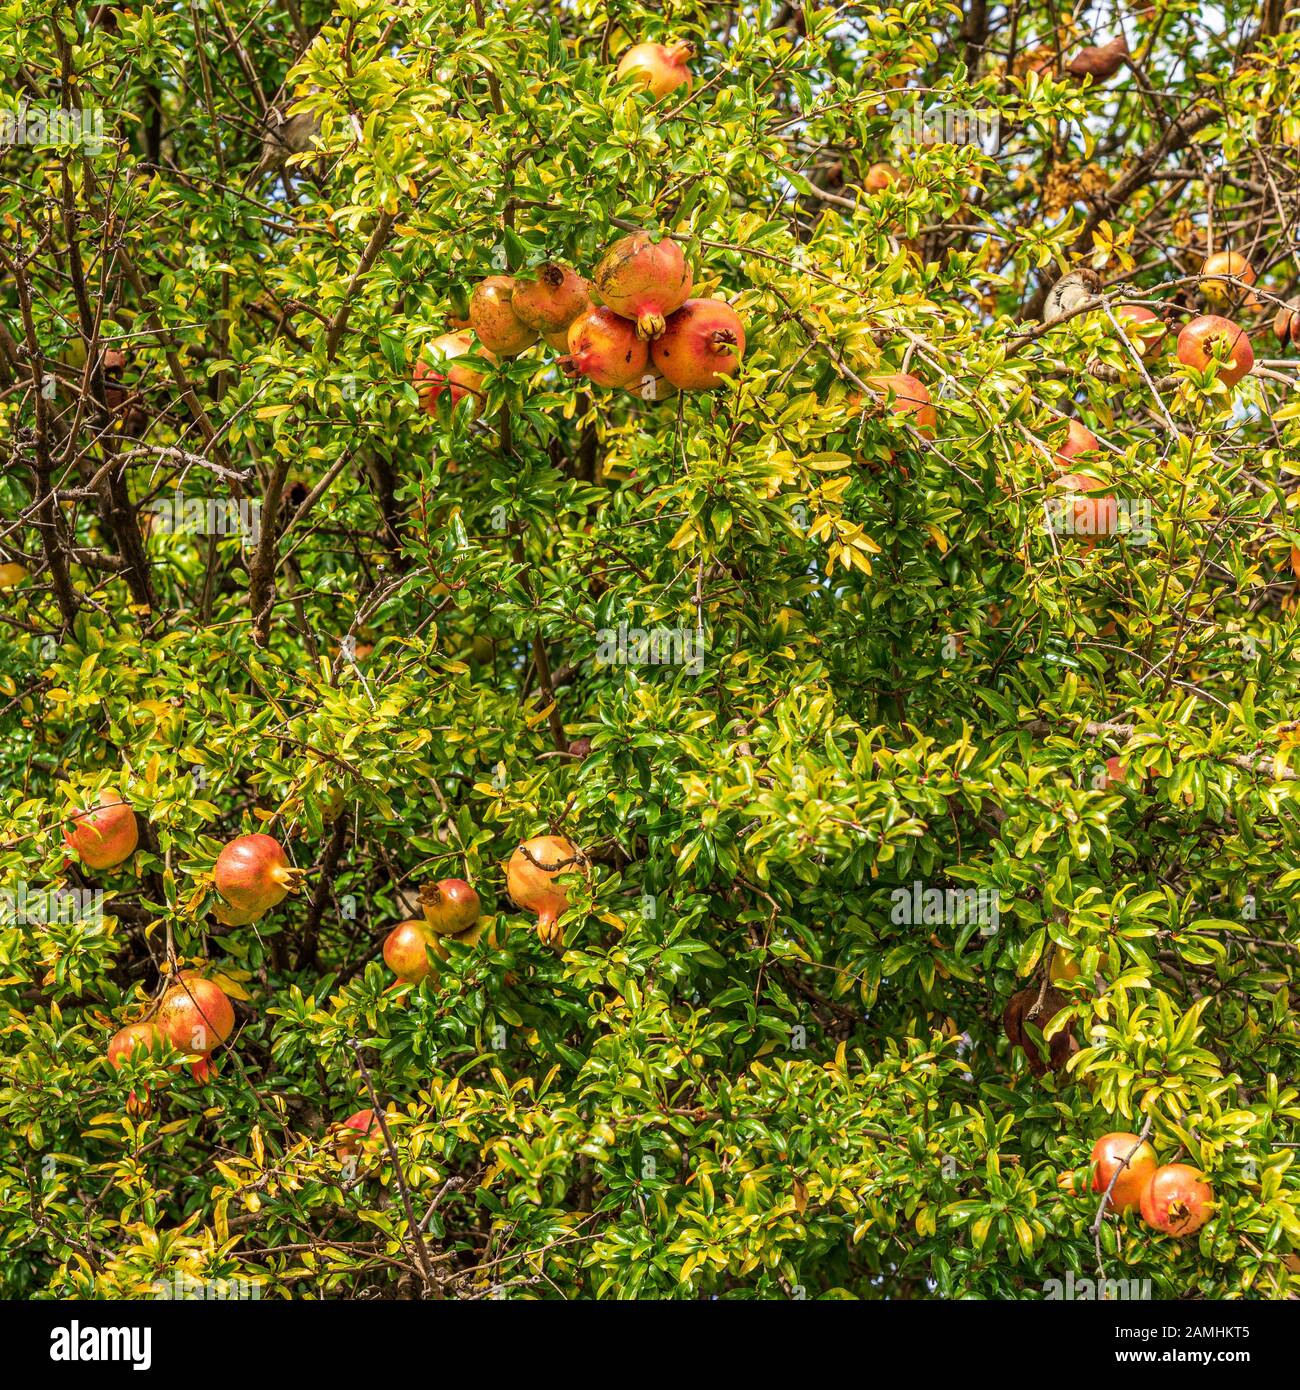 Punica granatum tree showing bunches of pomegranate fruit ready to be harvested in autumn Stock Photo